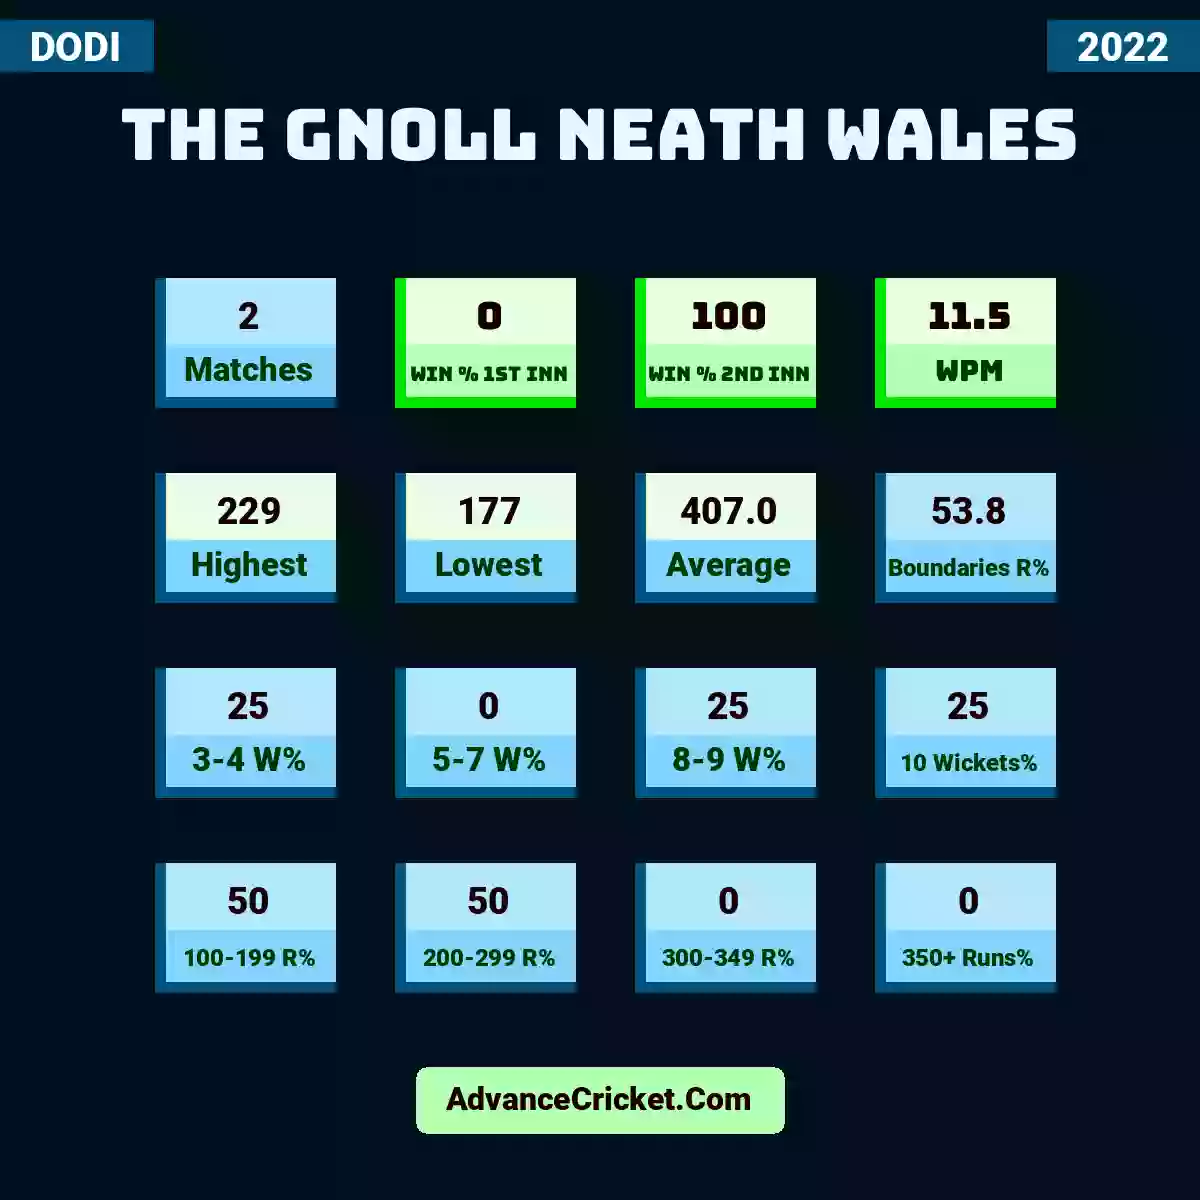 Image showing The Gnoll Neath Wales with Matches: 2, Win % 1st Inn: 0, Win % 2nd Inn: 100, WPM: 11.5, Highest: 229, Lowest: 177, Average: 407.0, Boundaries R%: 53.8, 3-4 W%: 25, 5-7 W%: 0, 8-9 W%: 25, 10 Wickets%: 25, 100-199 R%: 50, 200-299 R%: 50, 300-349 R%: 0, 350+ Runs%: 0.